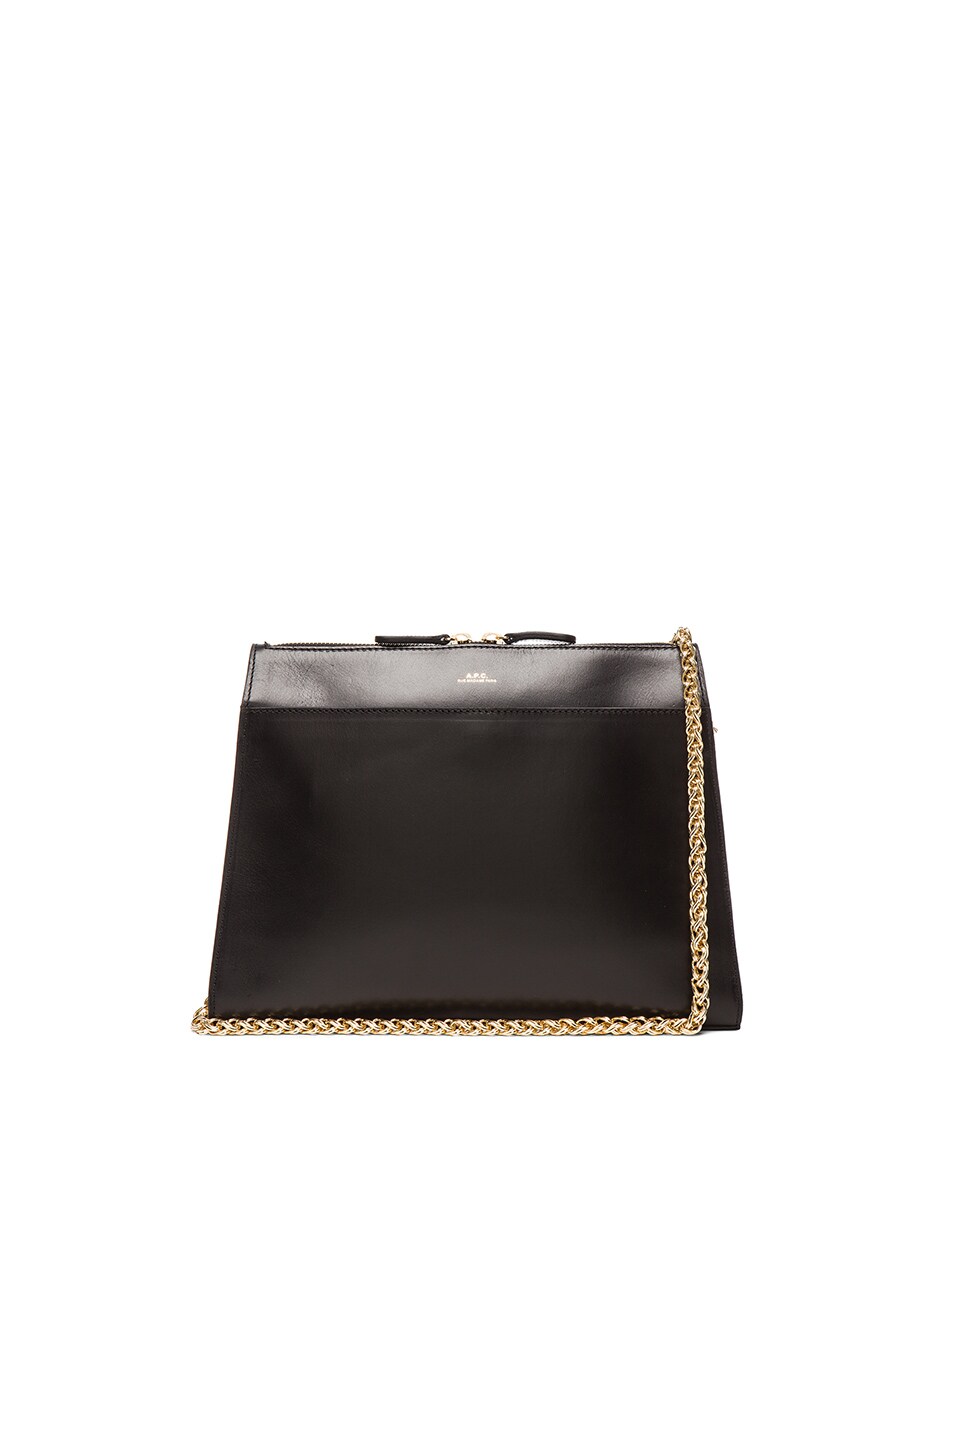 Image 1 of A.P.C. Edith Bag in Black